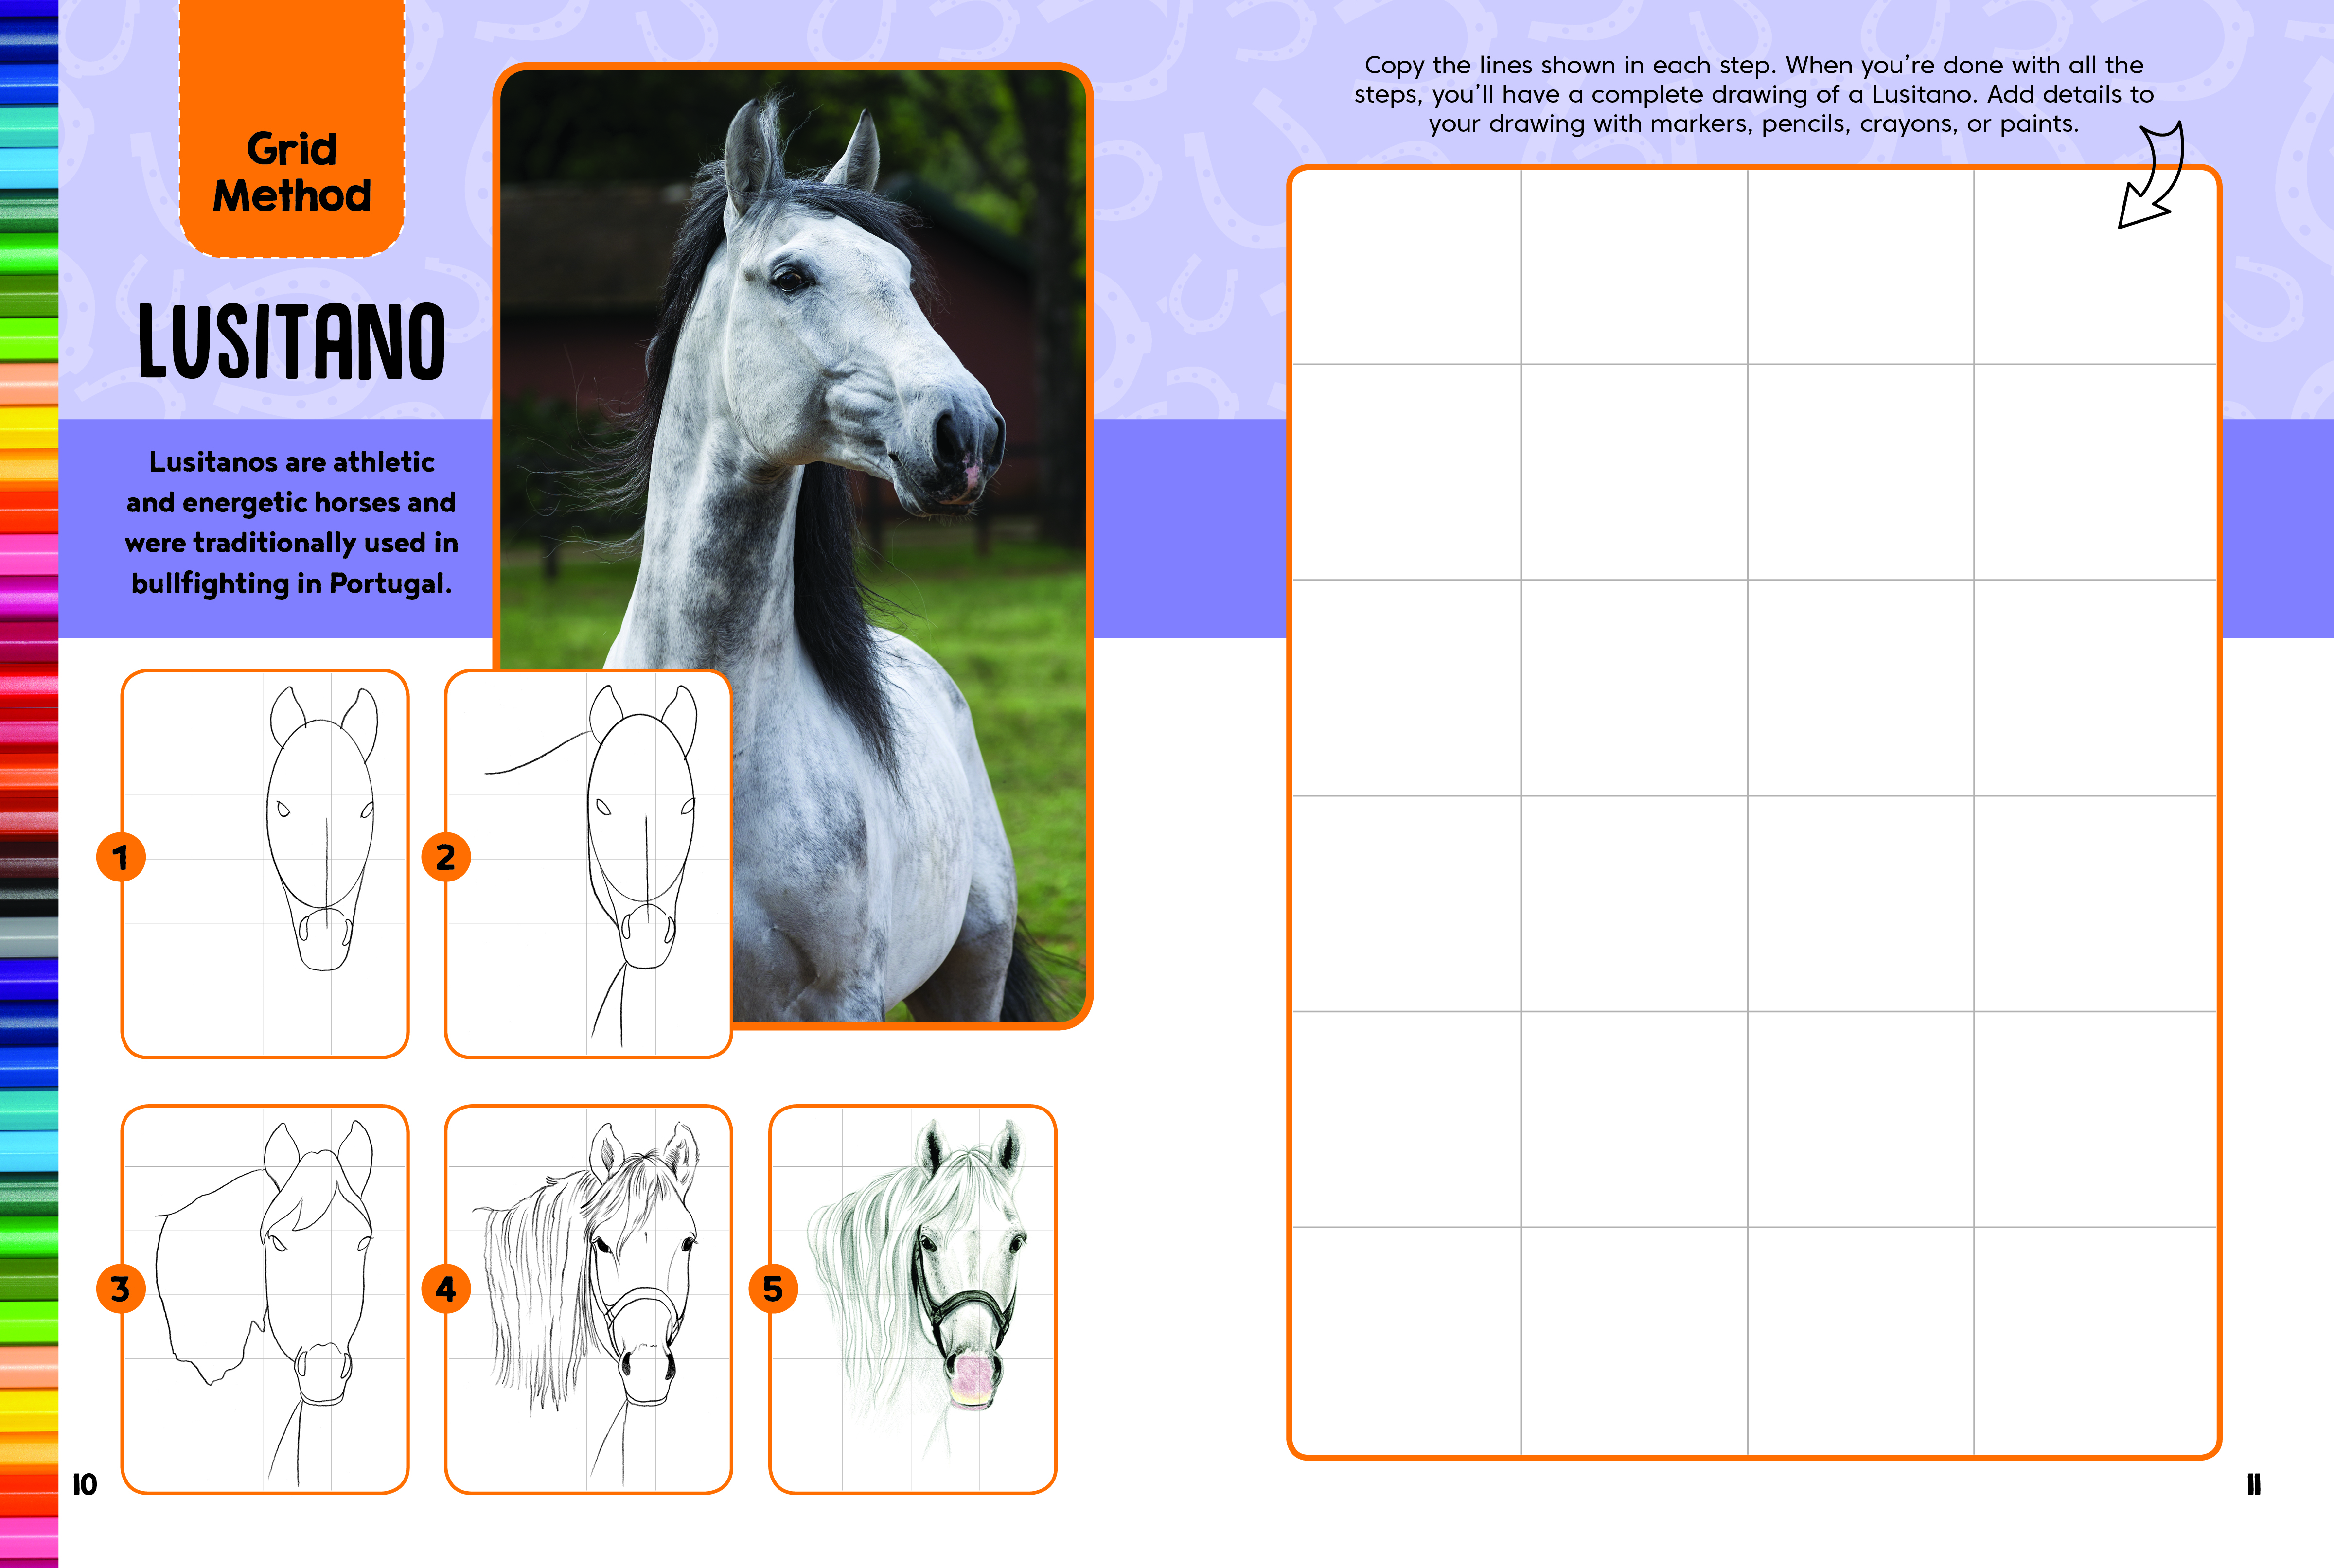 Horses & Ponies Drawing & Activity Book